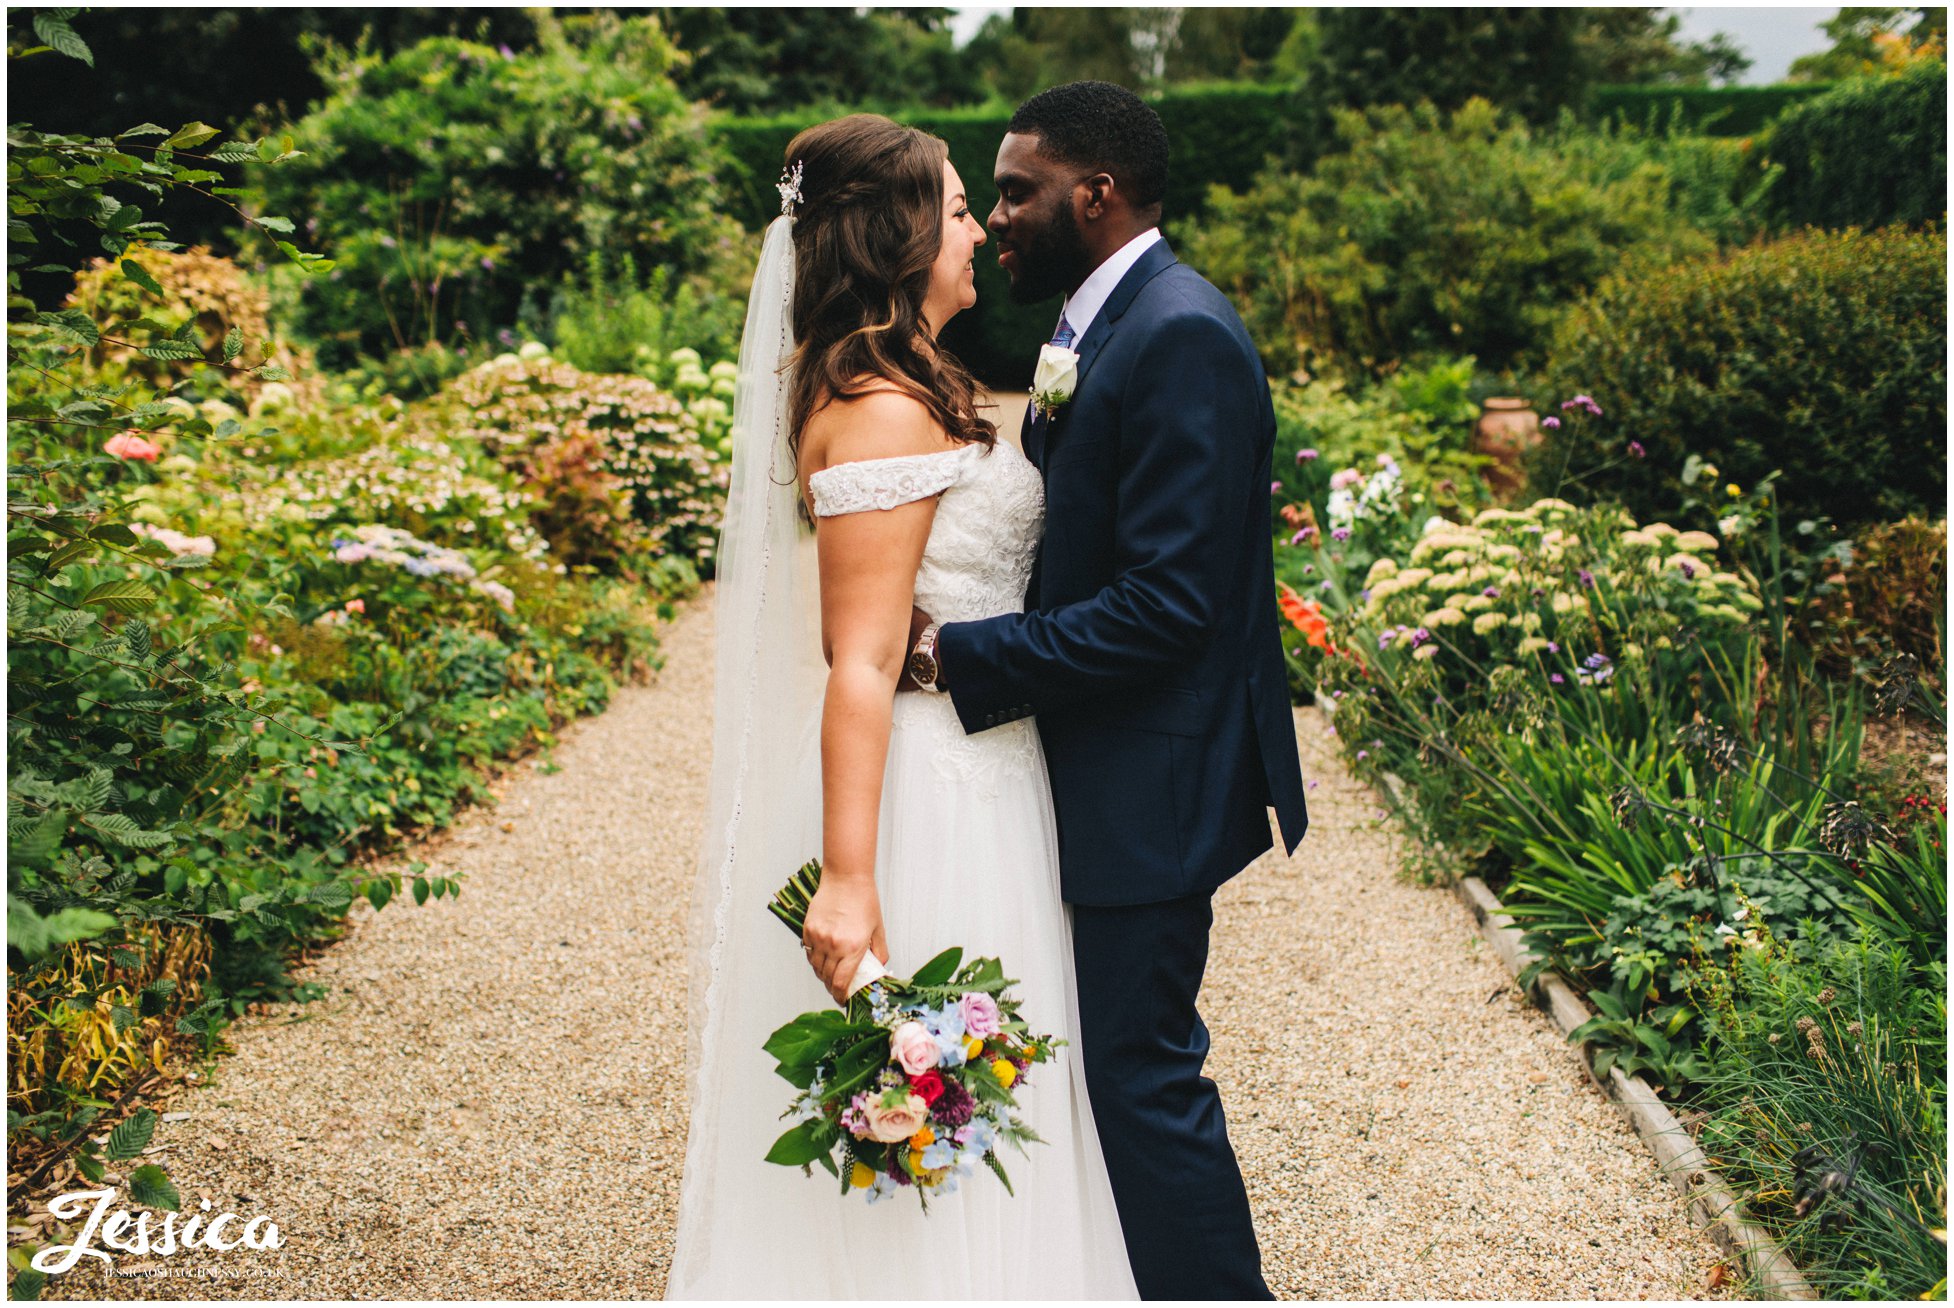 the bride and groom kiss in gaynes park gardens